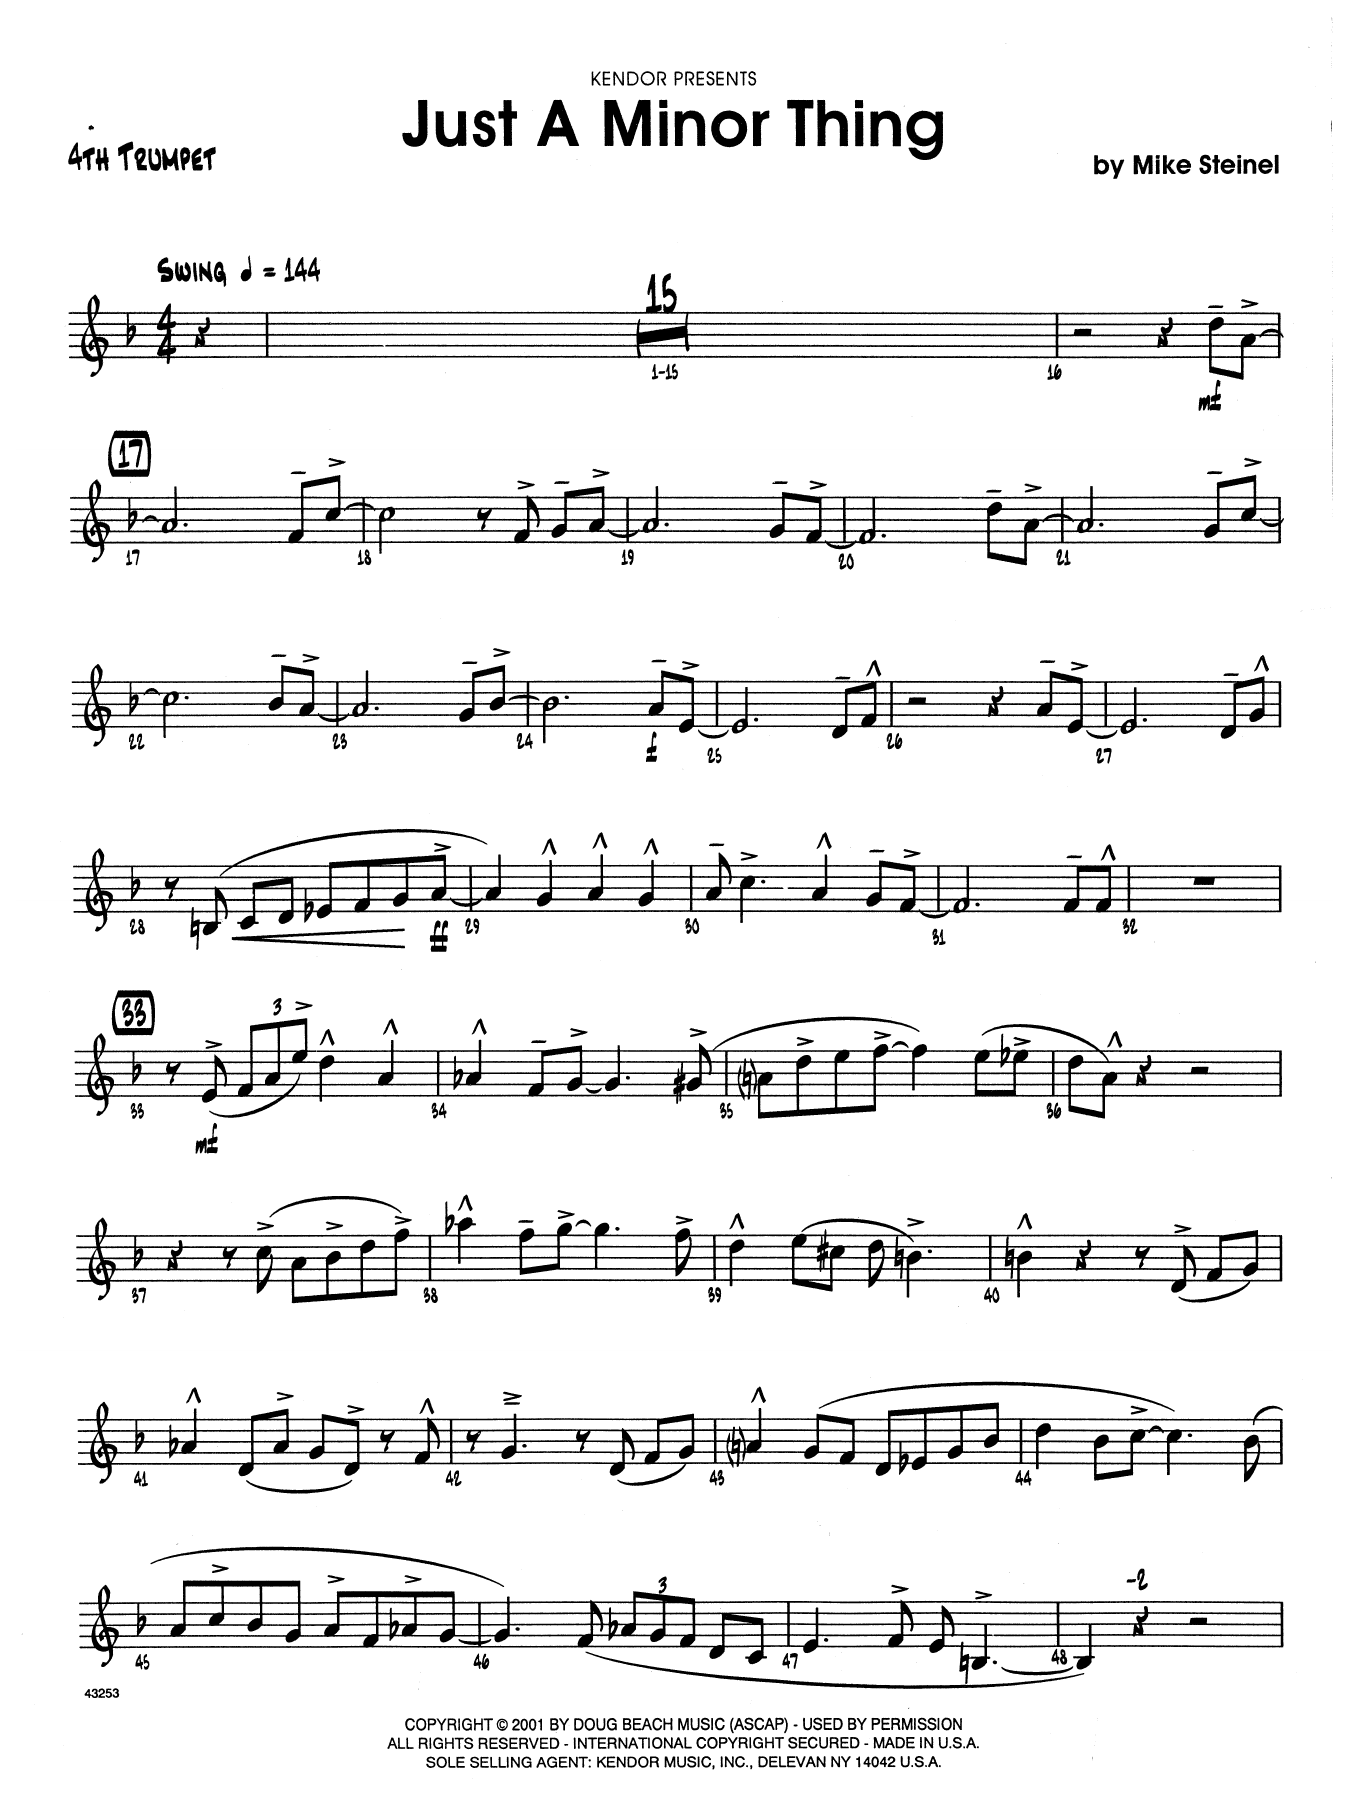 Download Mike Steinel Just A Minor Thing - 4th Bb Trumpet Sheet Music